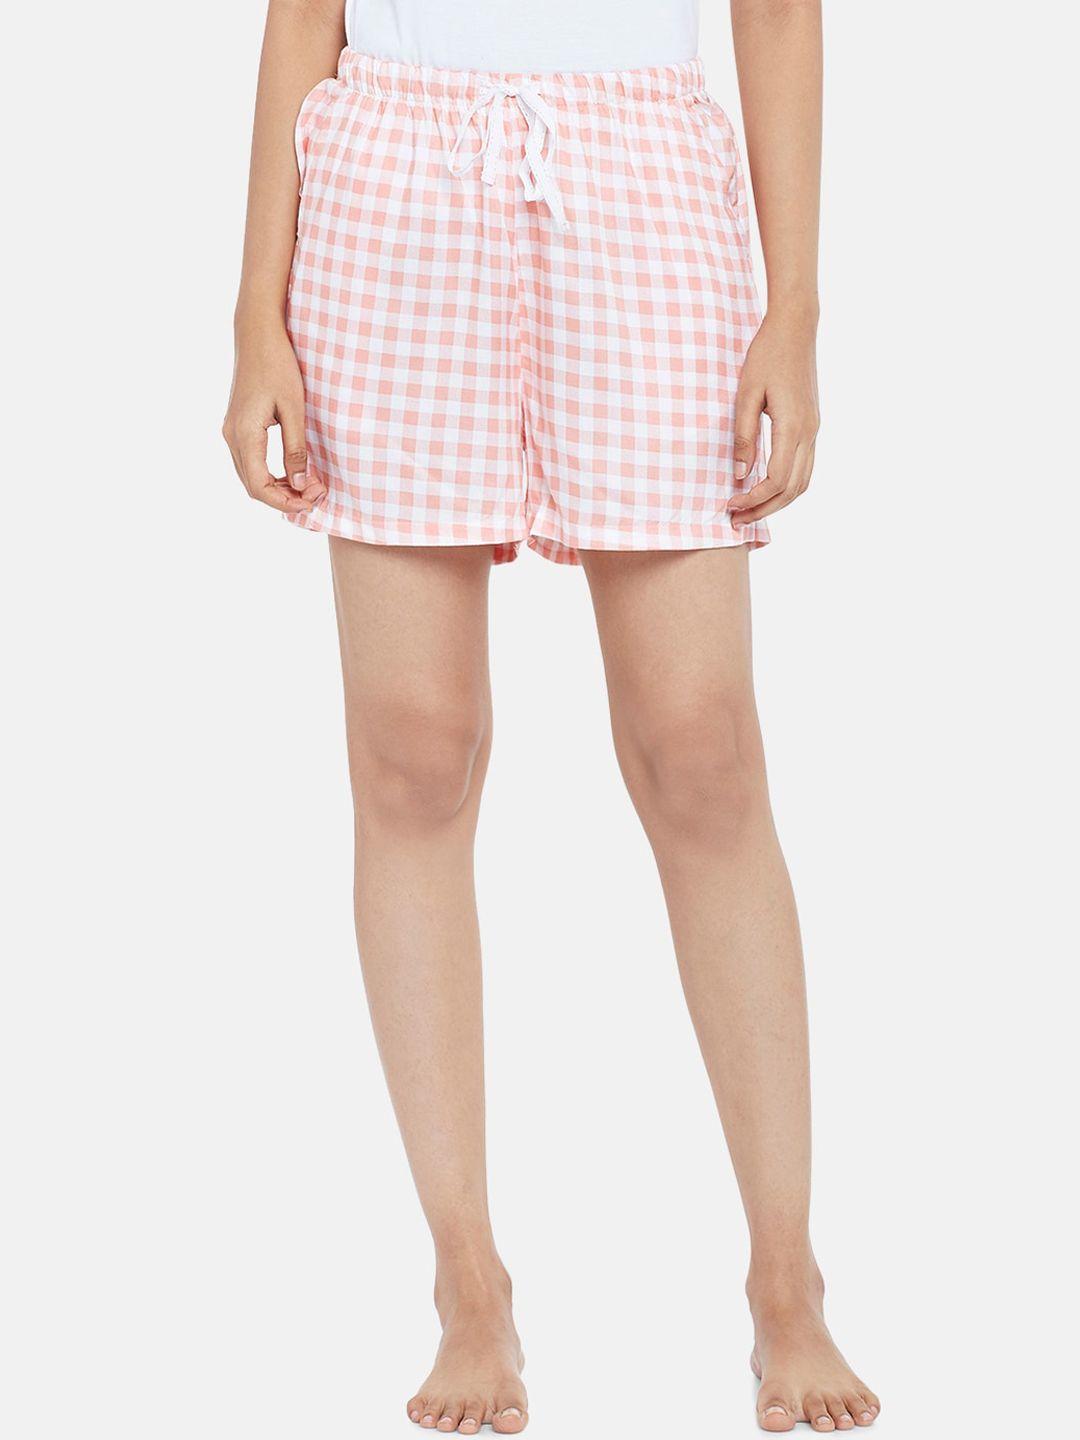 dreamz-by-pantaloons-women-red-checked-shorts